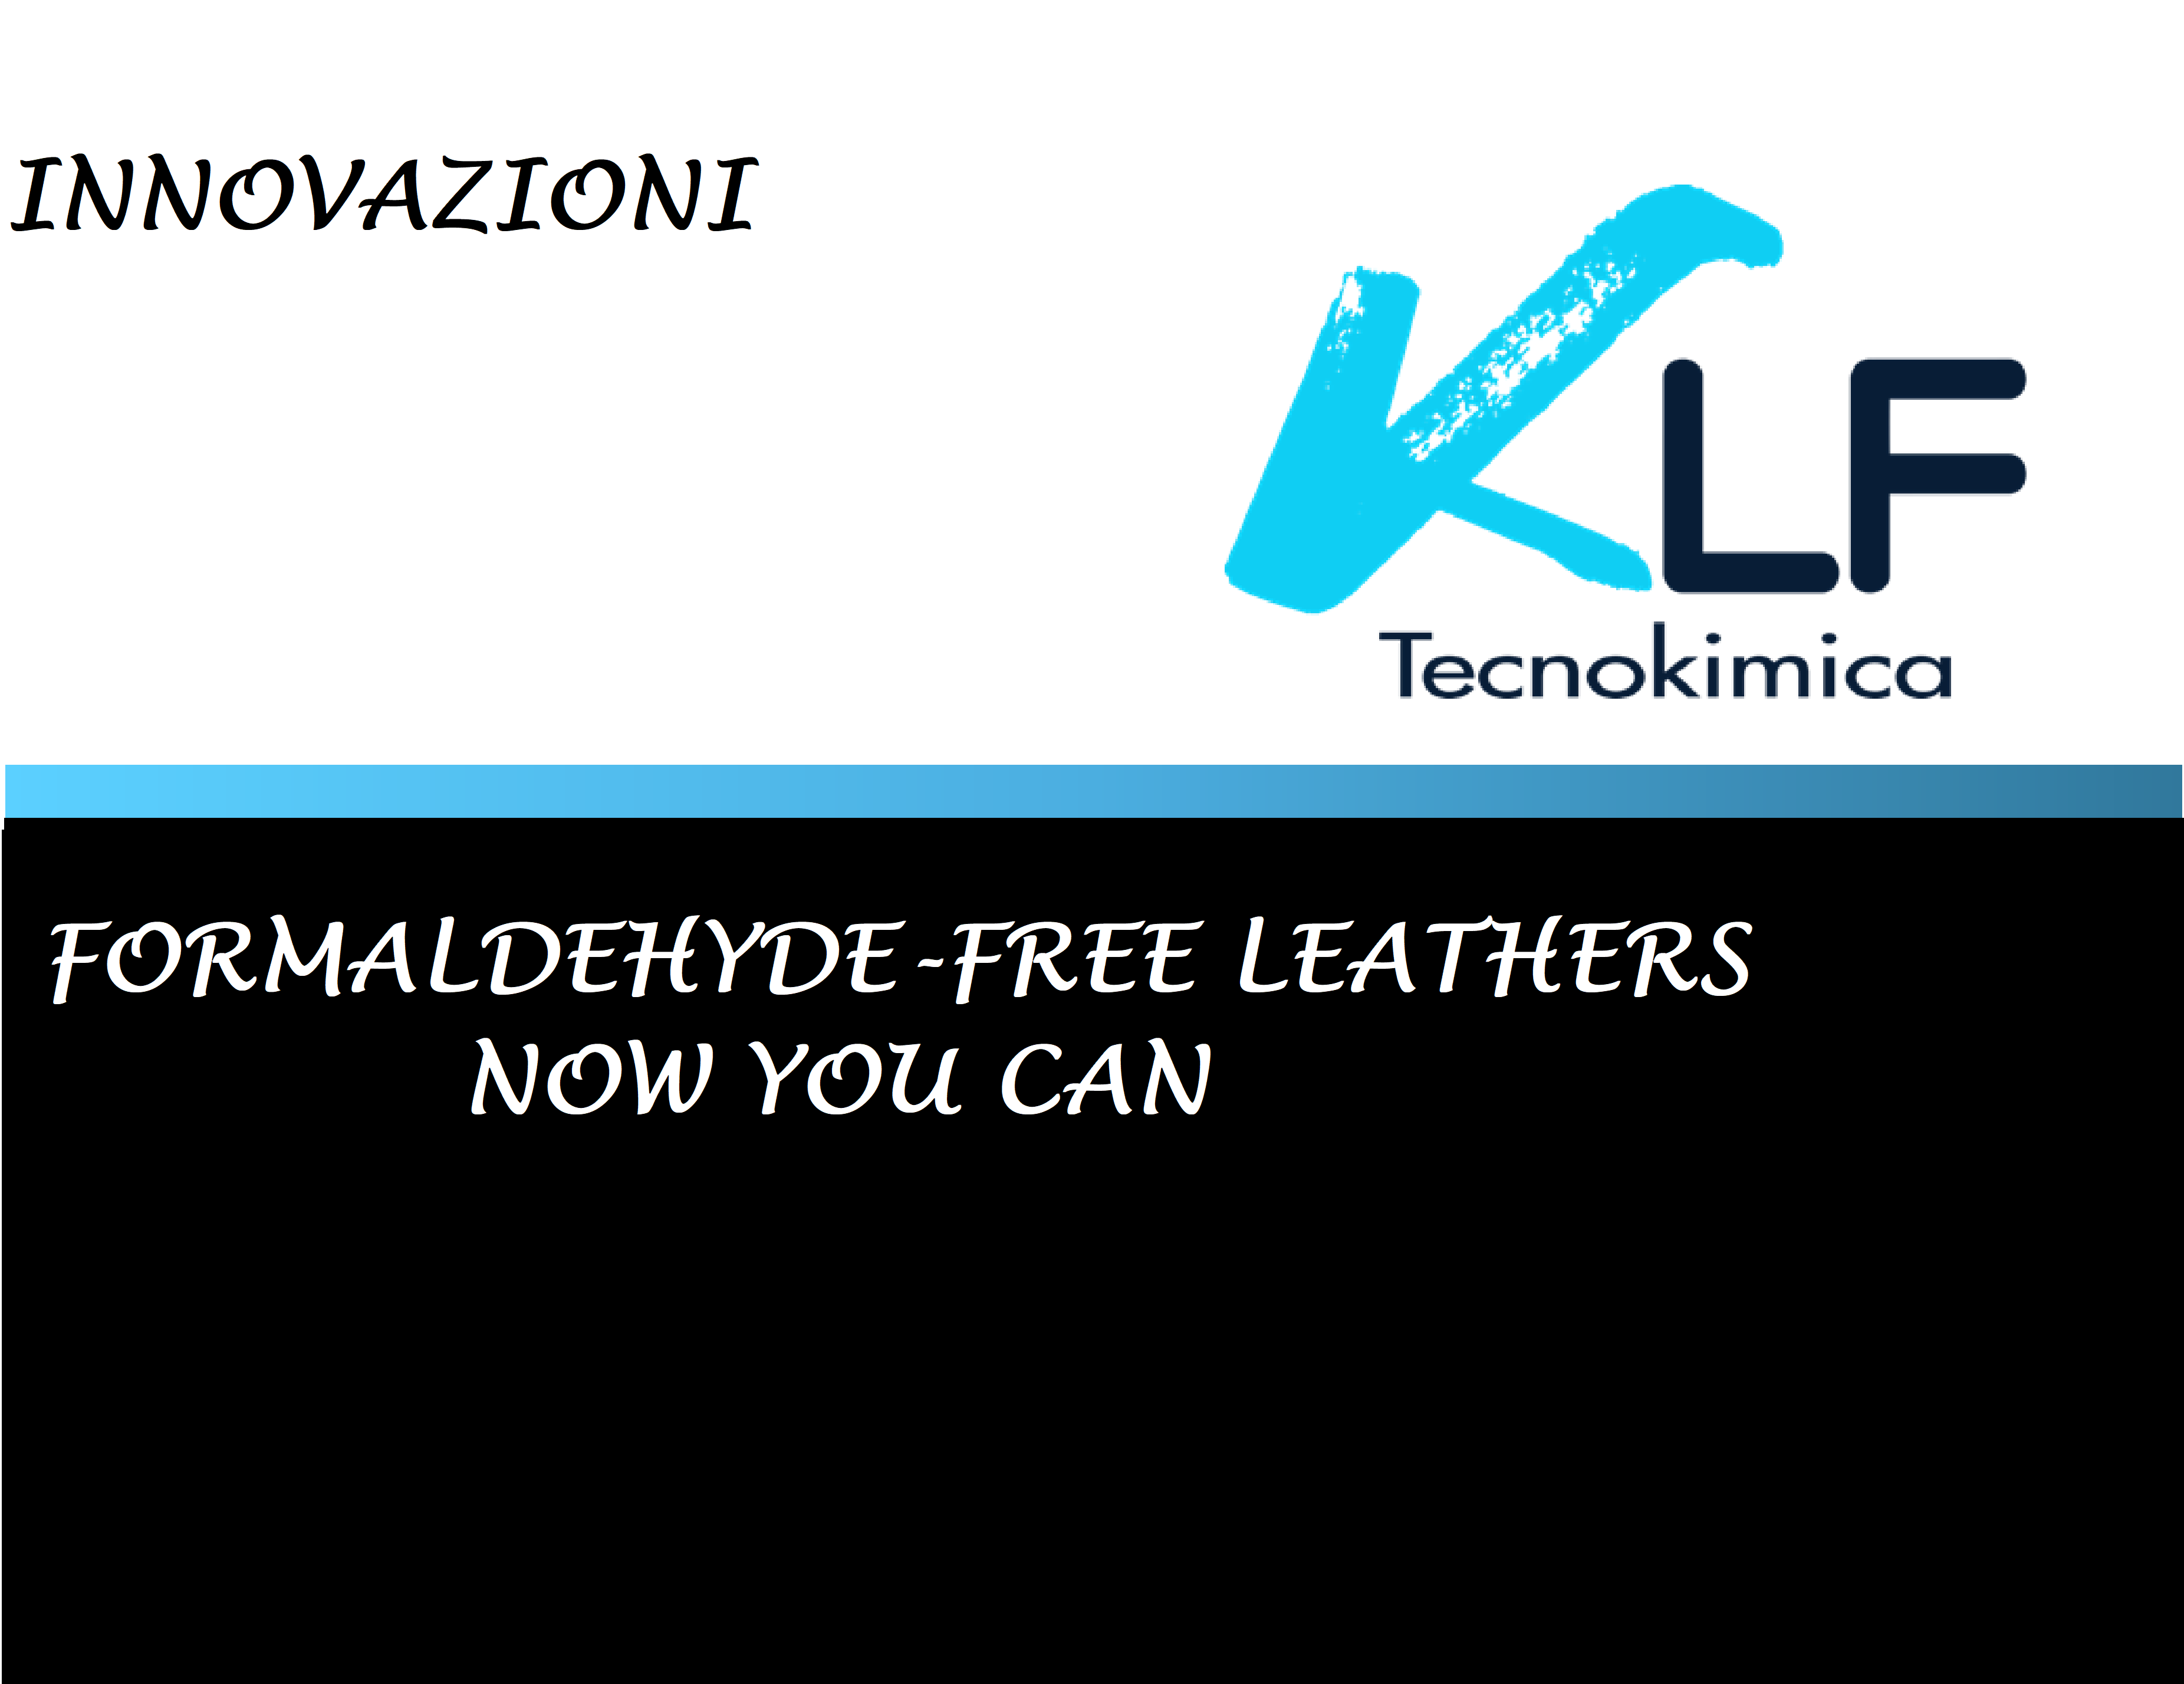 FORMALDEHYDE-FREE LEATHER - NOW YOU CAN